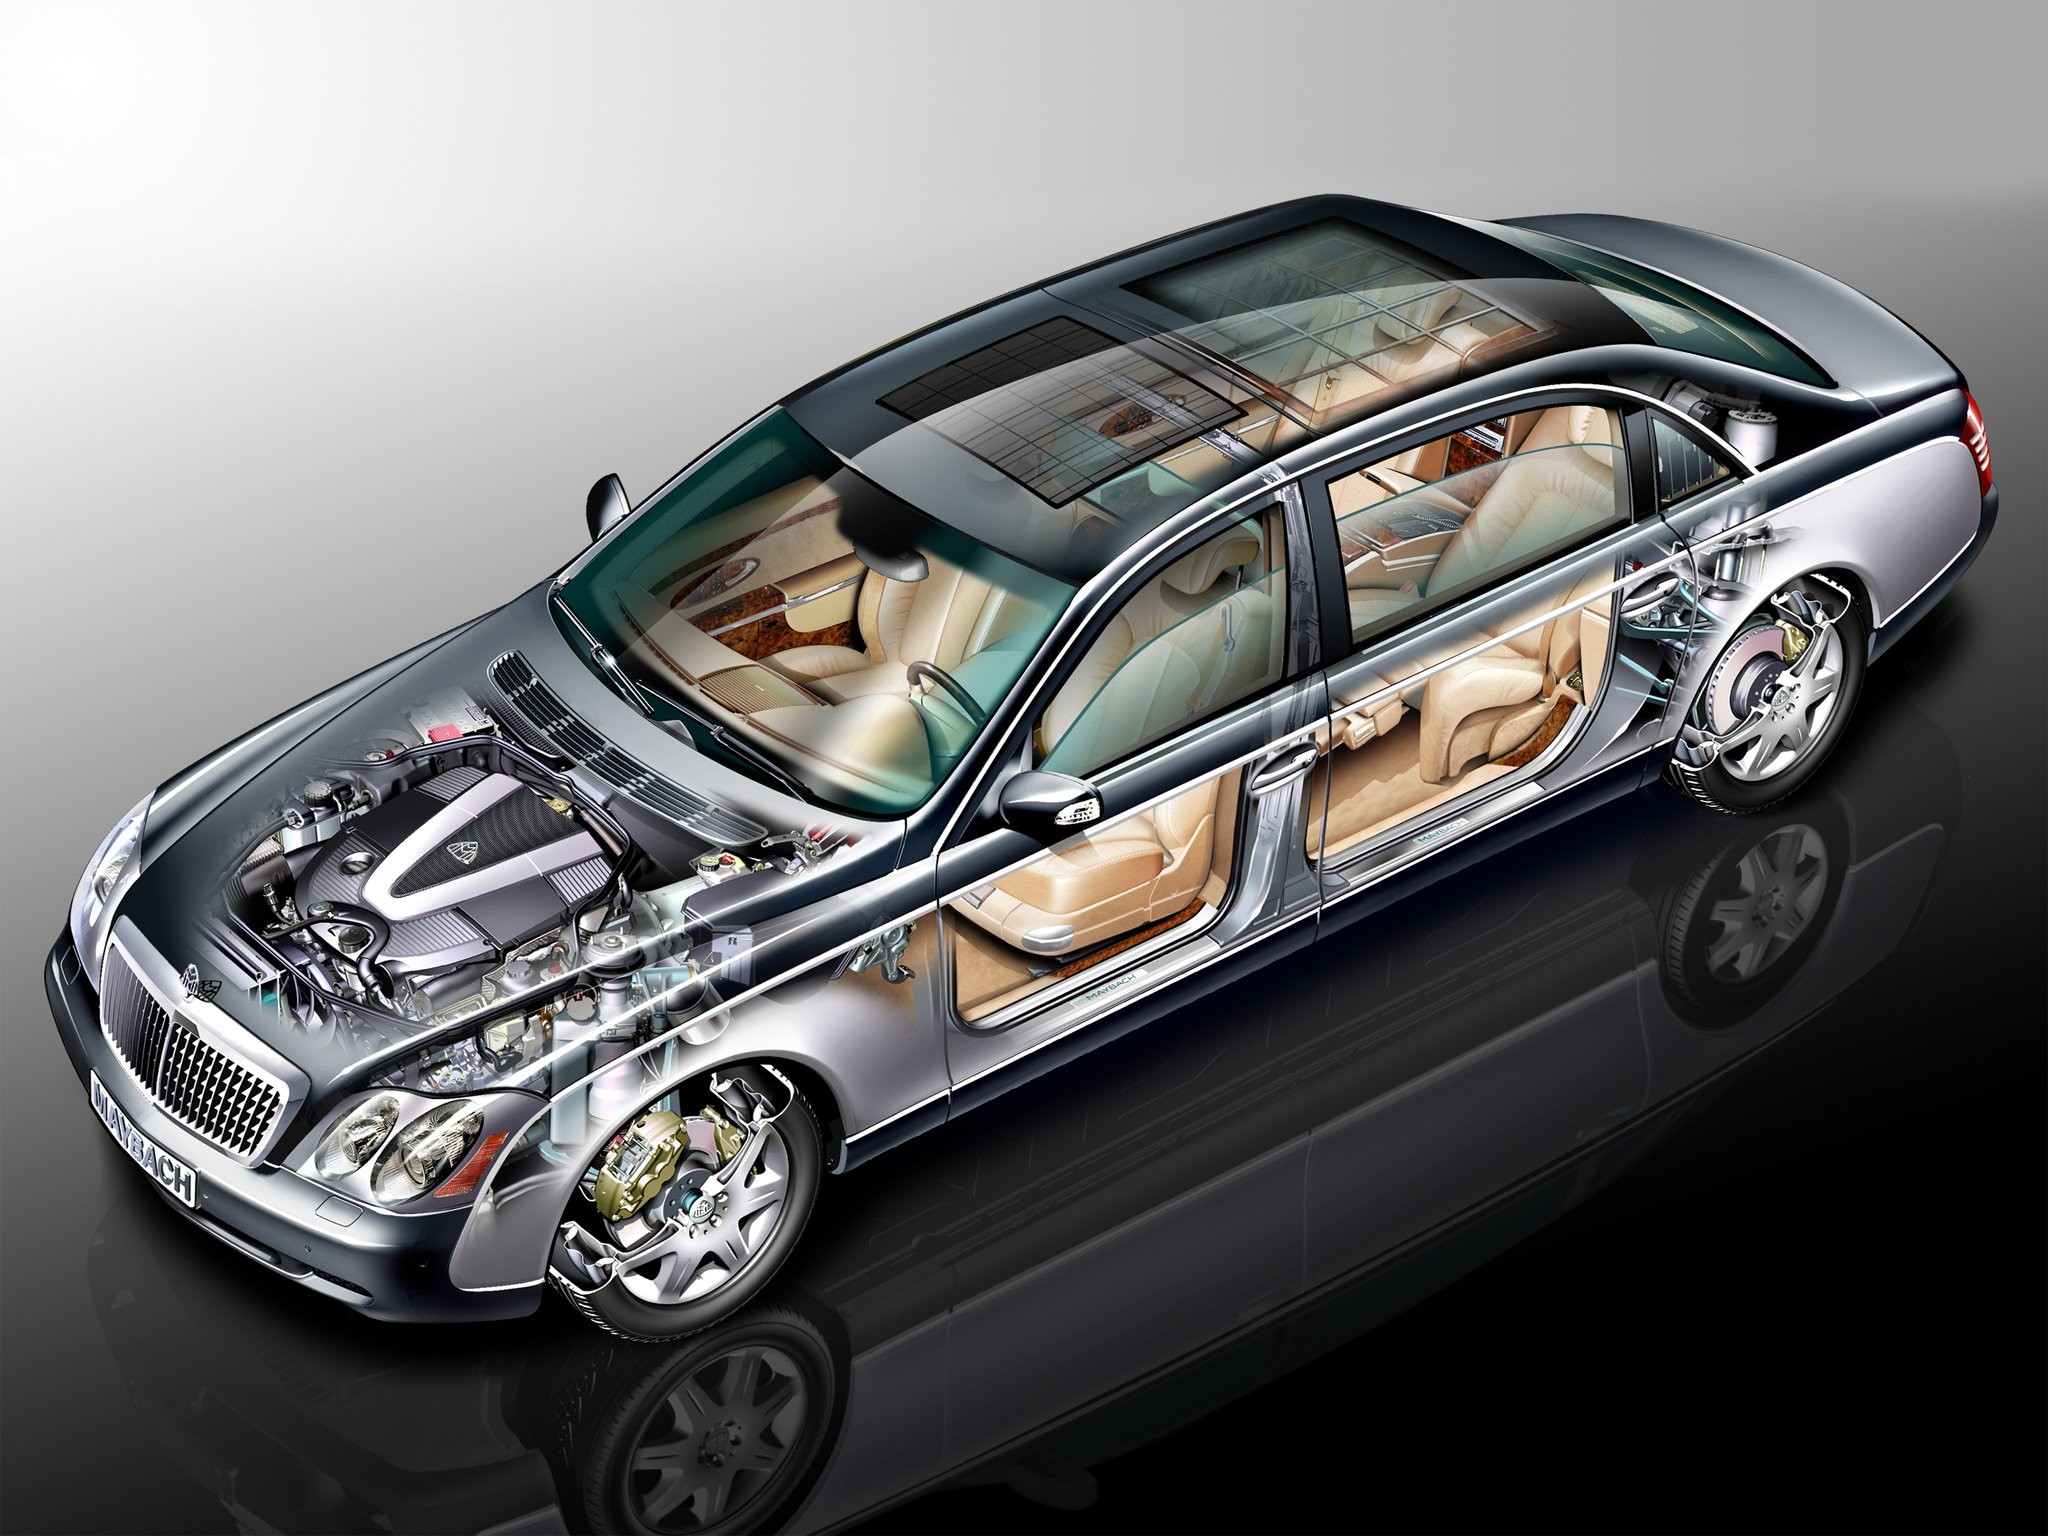 engines, Schematic, Gears, Engineering, Car, Maybach, Daimler AG, Vehicle, Wheels, Sketches, Reflection, Luxury Cars, Blueprints Wallpaper